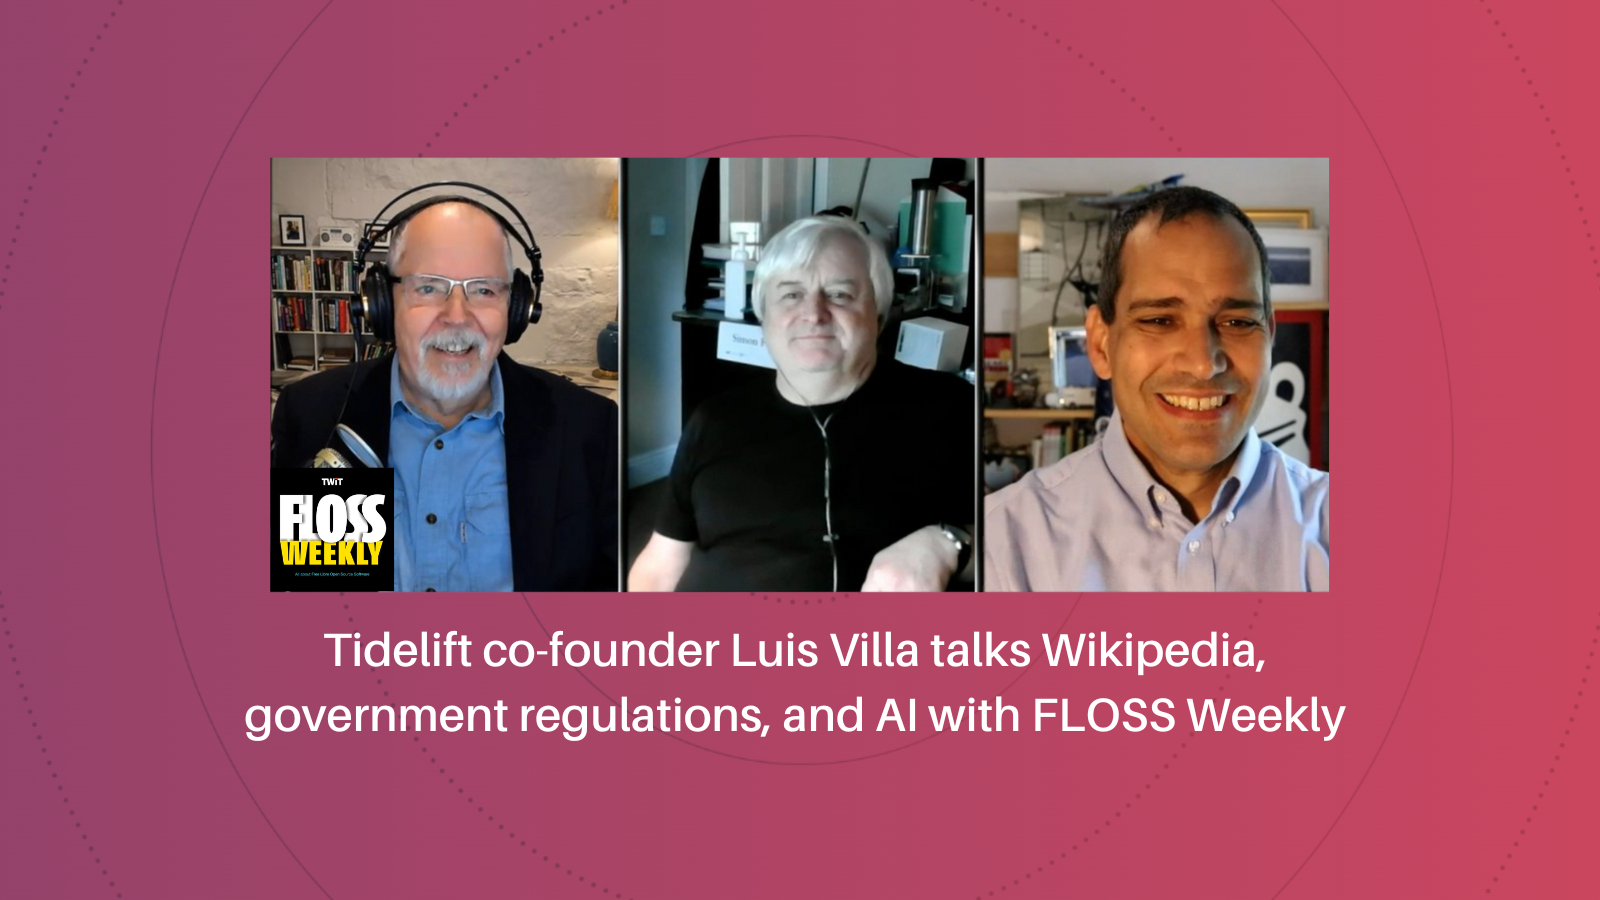 Tidelift co-founder Luis Villa talks Wikipedia, government regulations, and AI with FLOSS Weekly